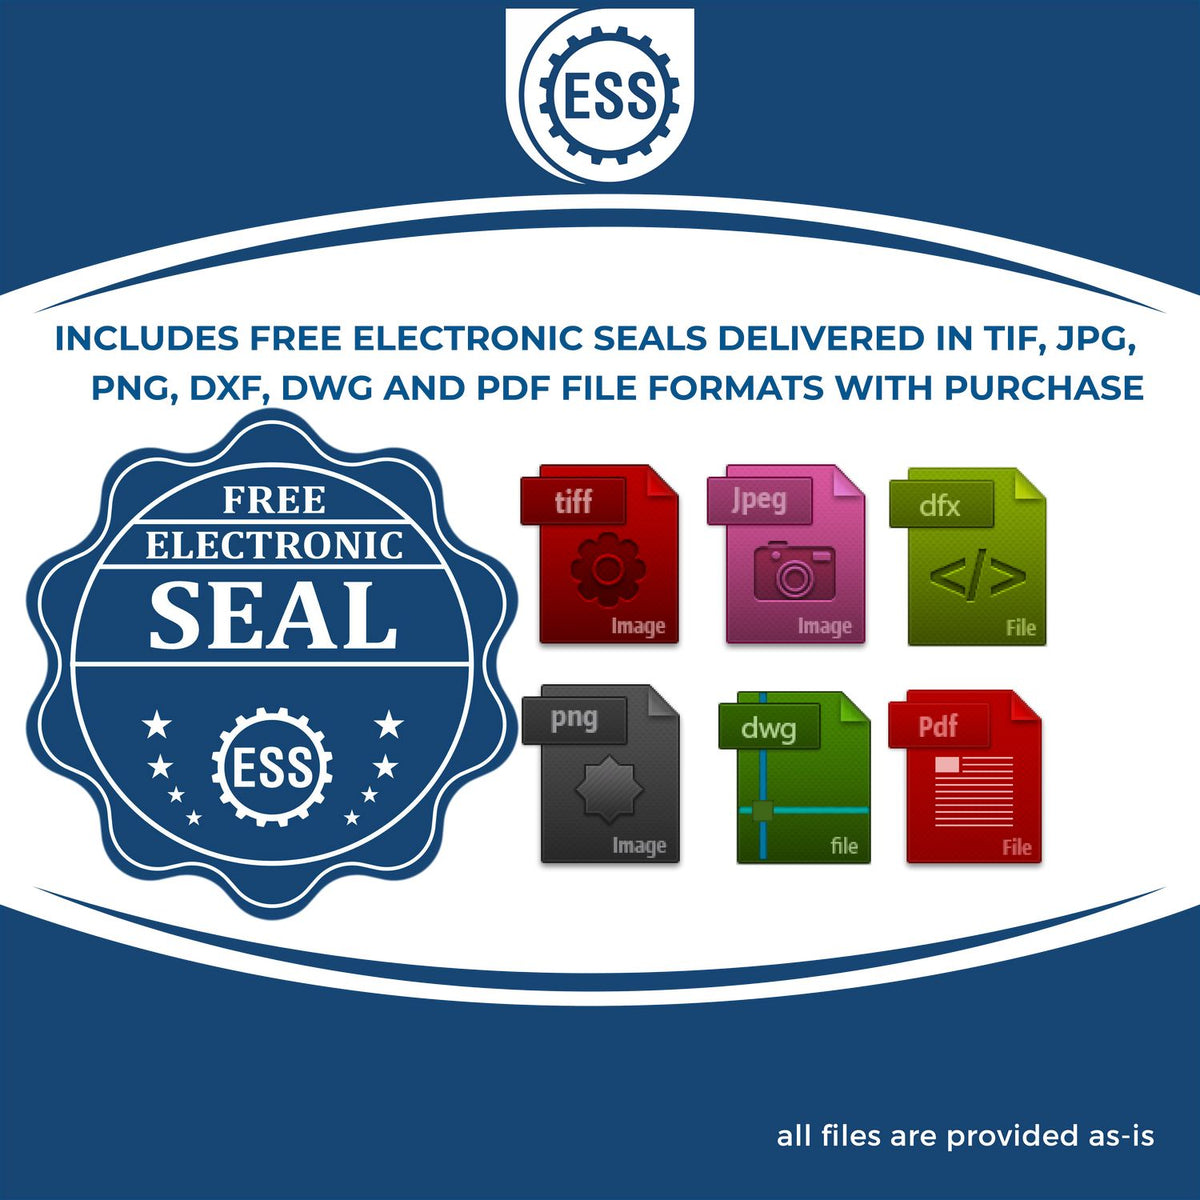 An infographic for the free electronic seal for the Gift Pennsylvania Architect Seal illustrating the different file type icons such as DXF, DWG, TIF, JPG and PNG.